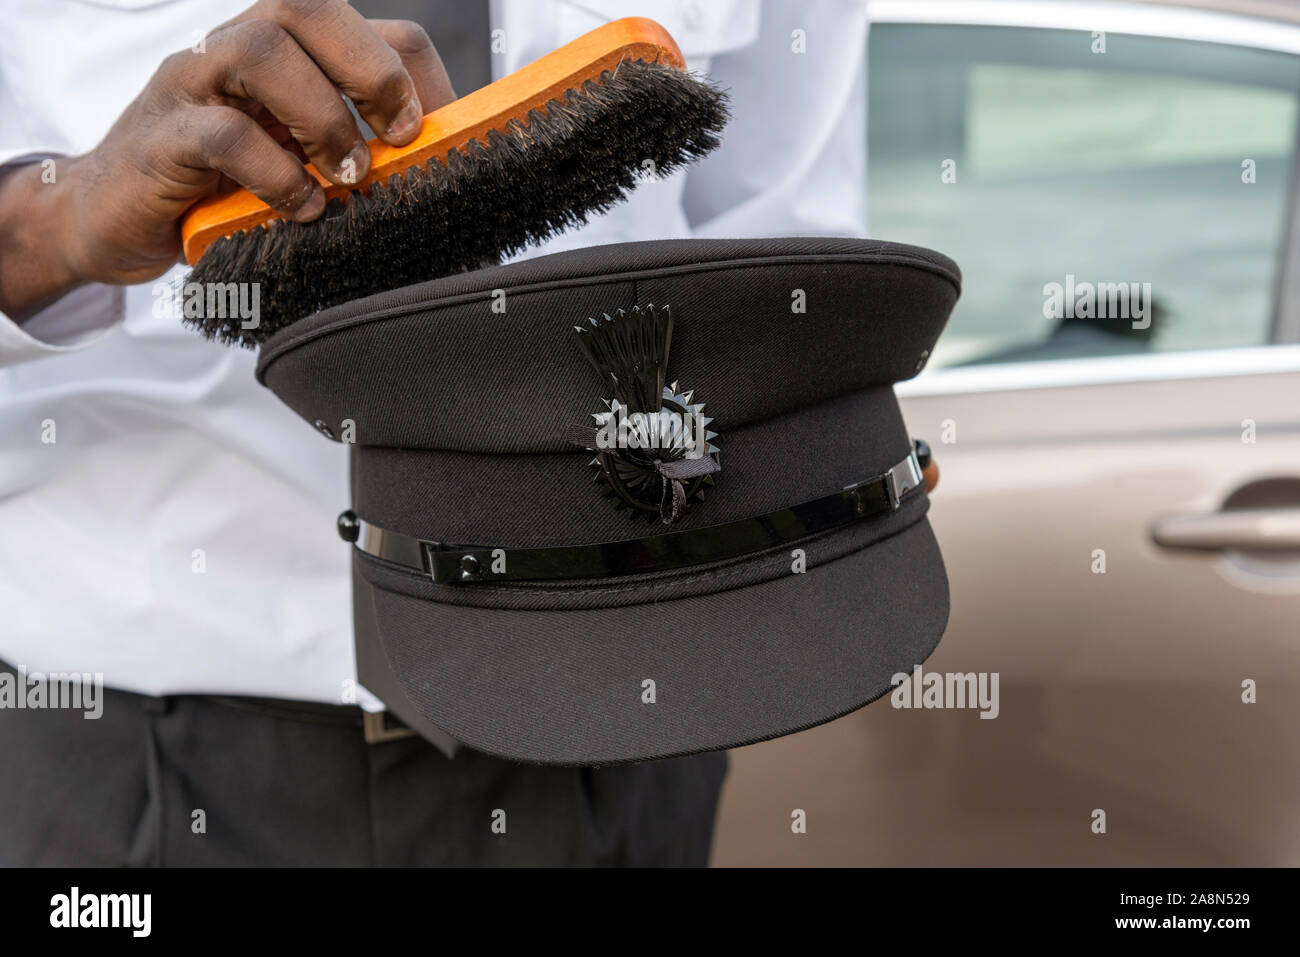 Andover, England, UK. October 2019. Chauffeur brushing the dust from his black uniform hat. Stock Photo